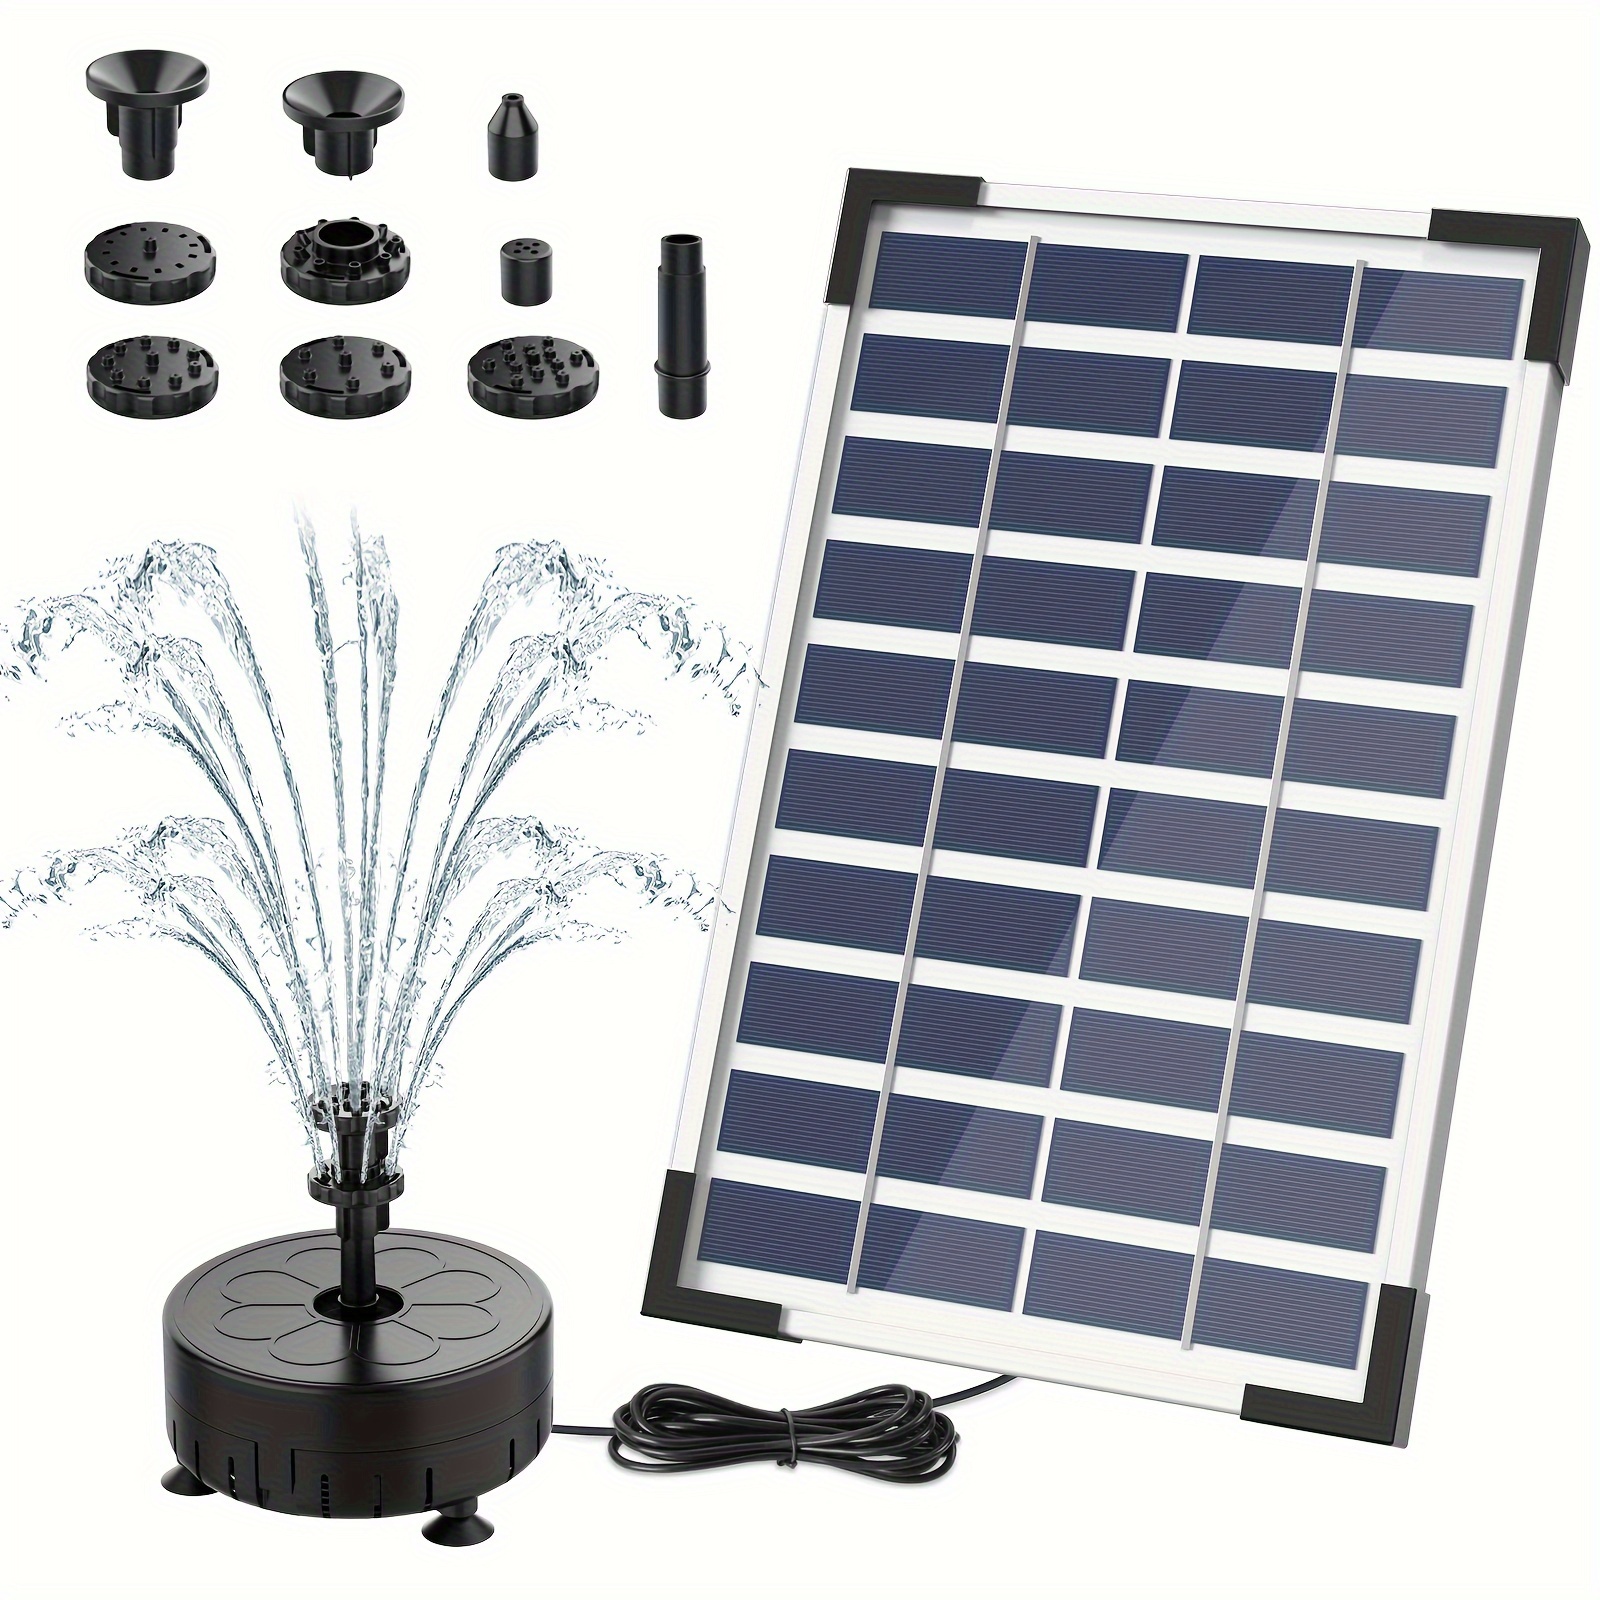 

1 Pack Solar Powered Water Fountain Pump With Led Lights, Portable Floating Solar Panel Bird Bath Fountain, Garden Pond Pool Outdoor Decor, Plastic, With Battery Storage